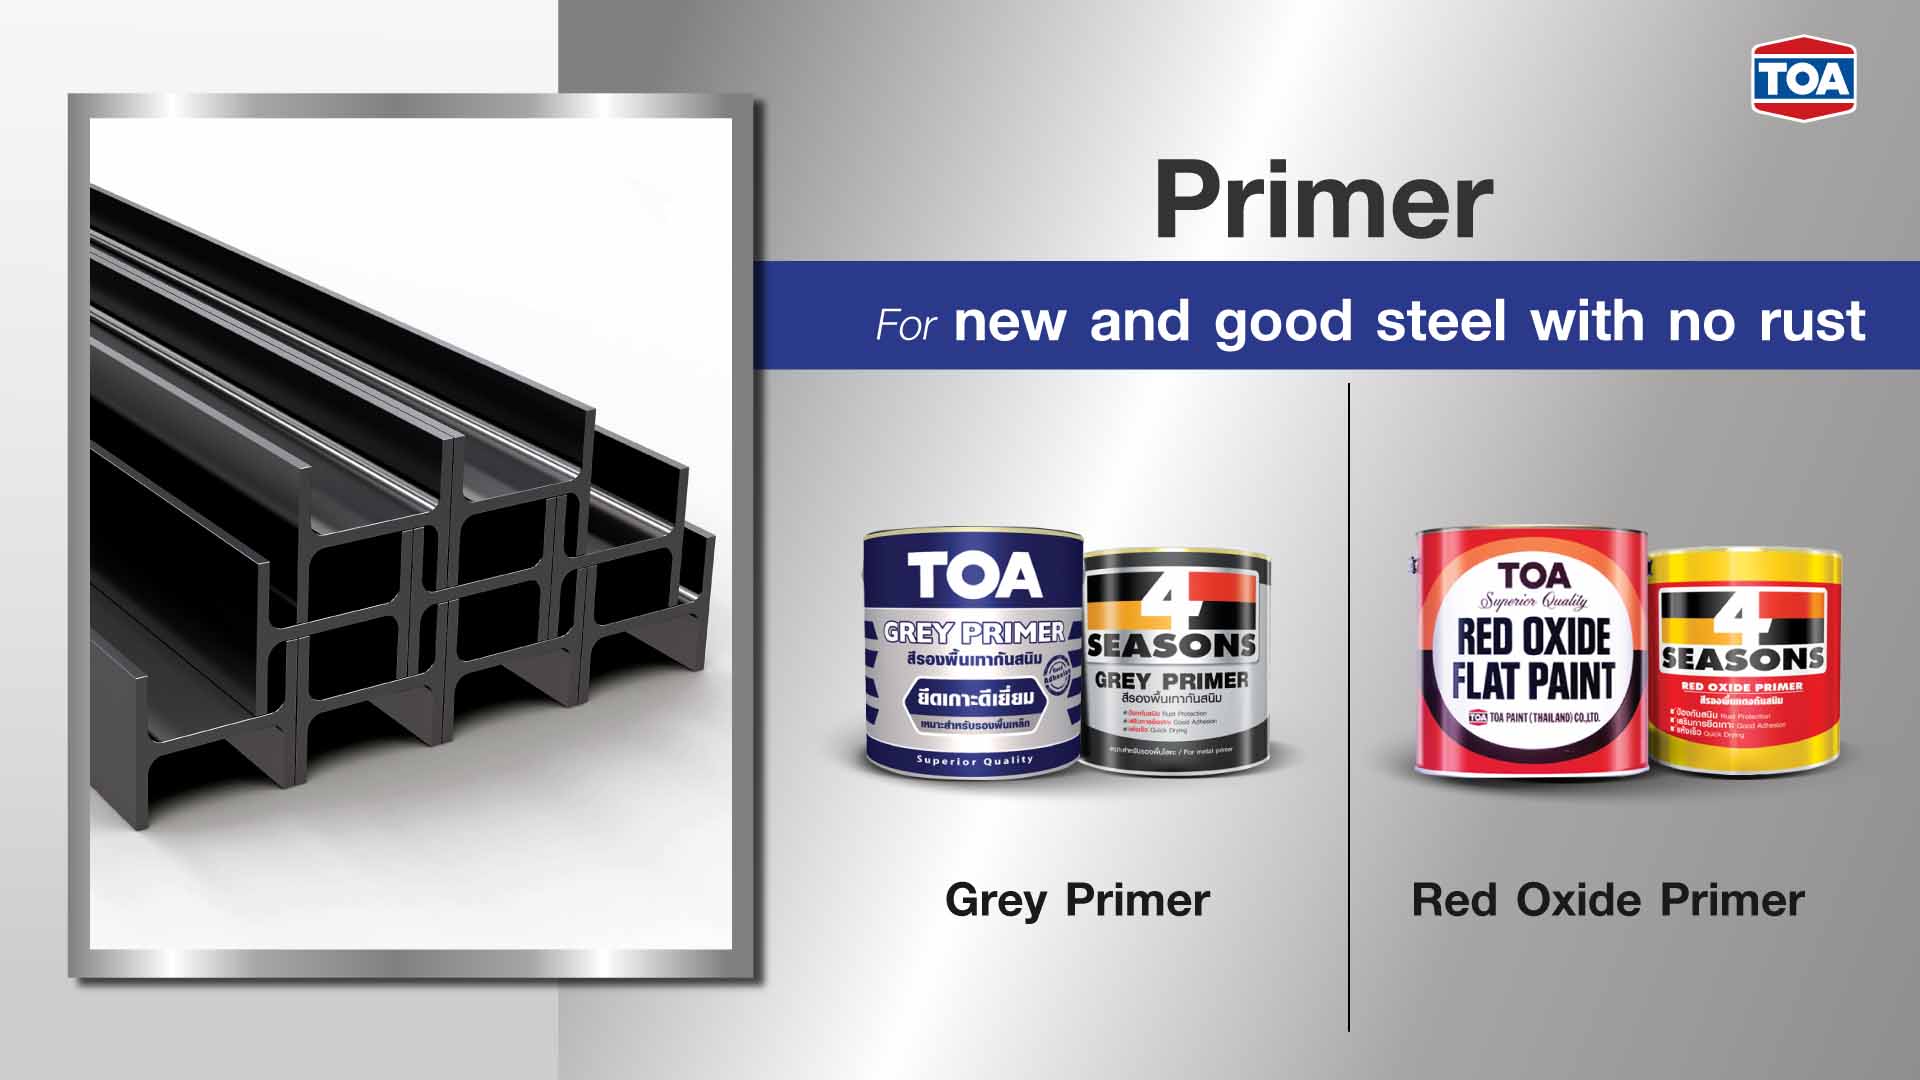 Primer for new and good steel with no rust